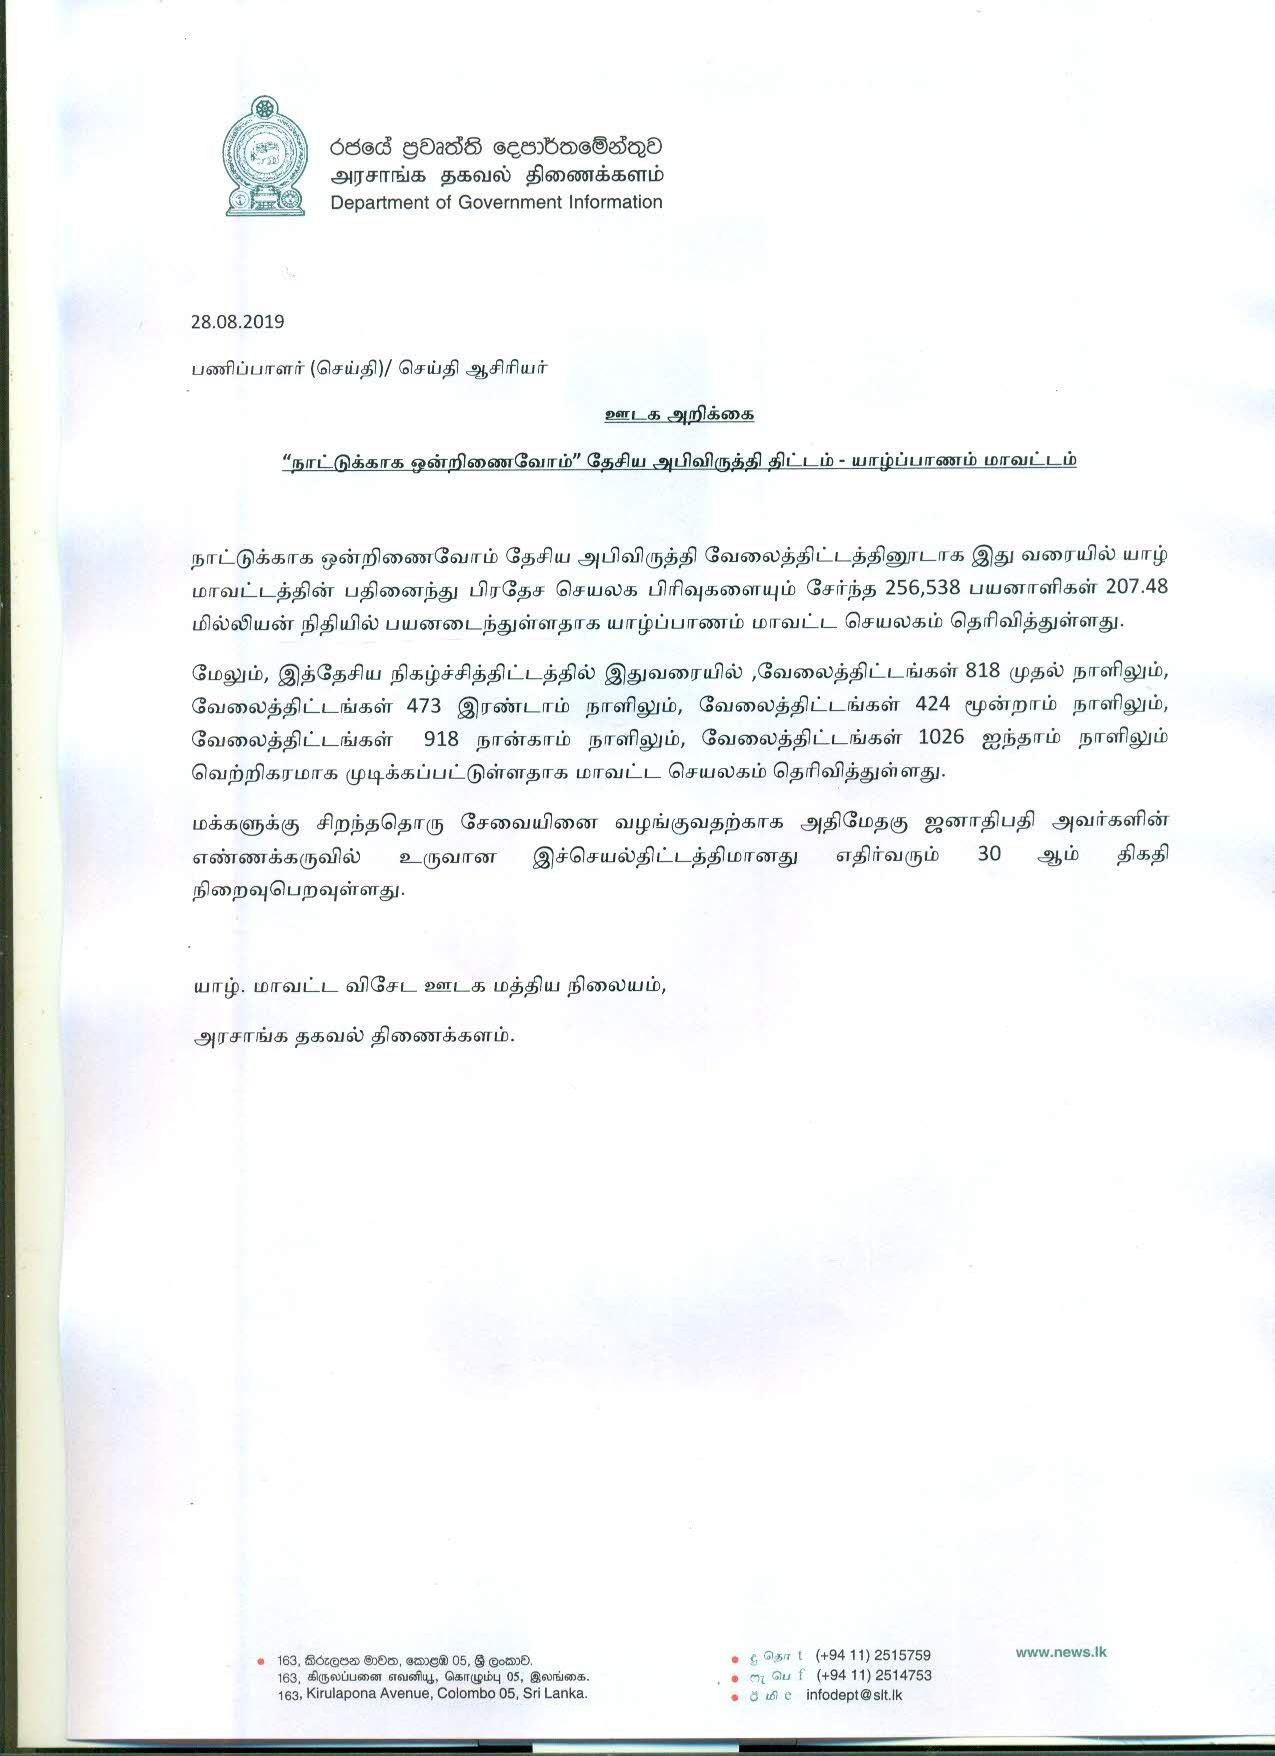 Media Release on 28.08.2019 Tamil 1 page 001